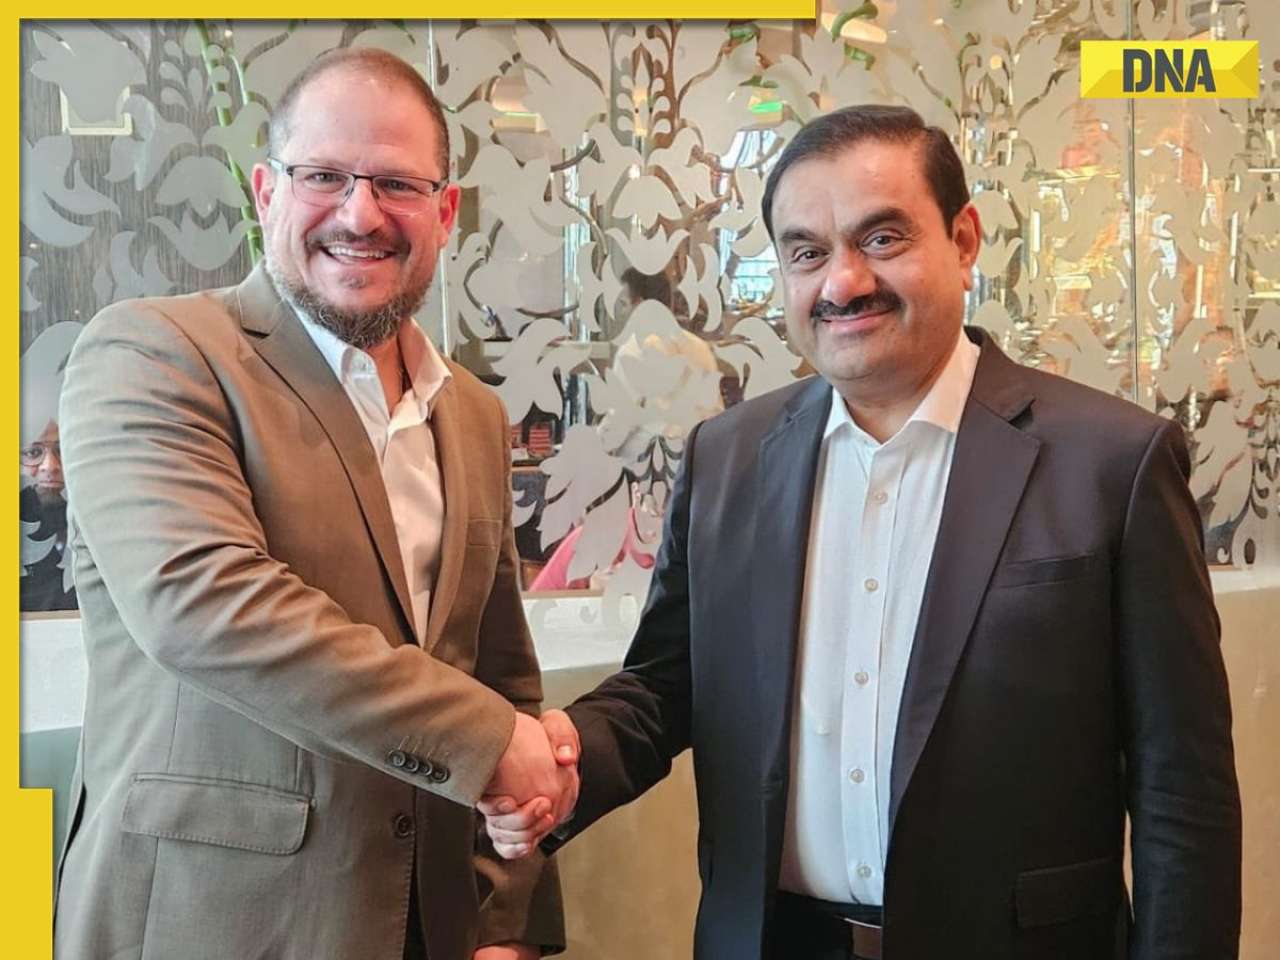 Gautam Adani discusses semiconductors, AI with Qualcomm CEO Cristiano Amon, shares post on X